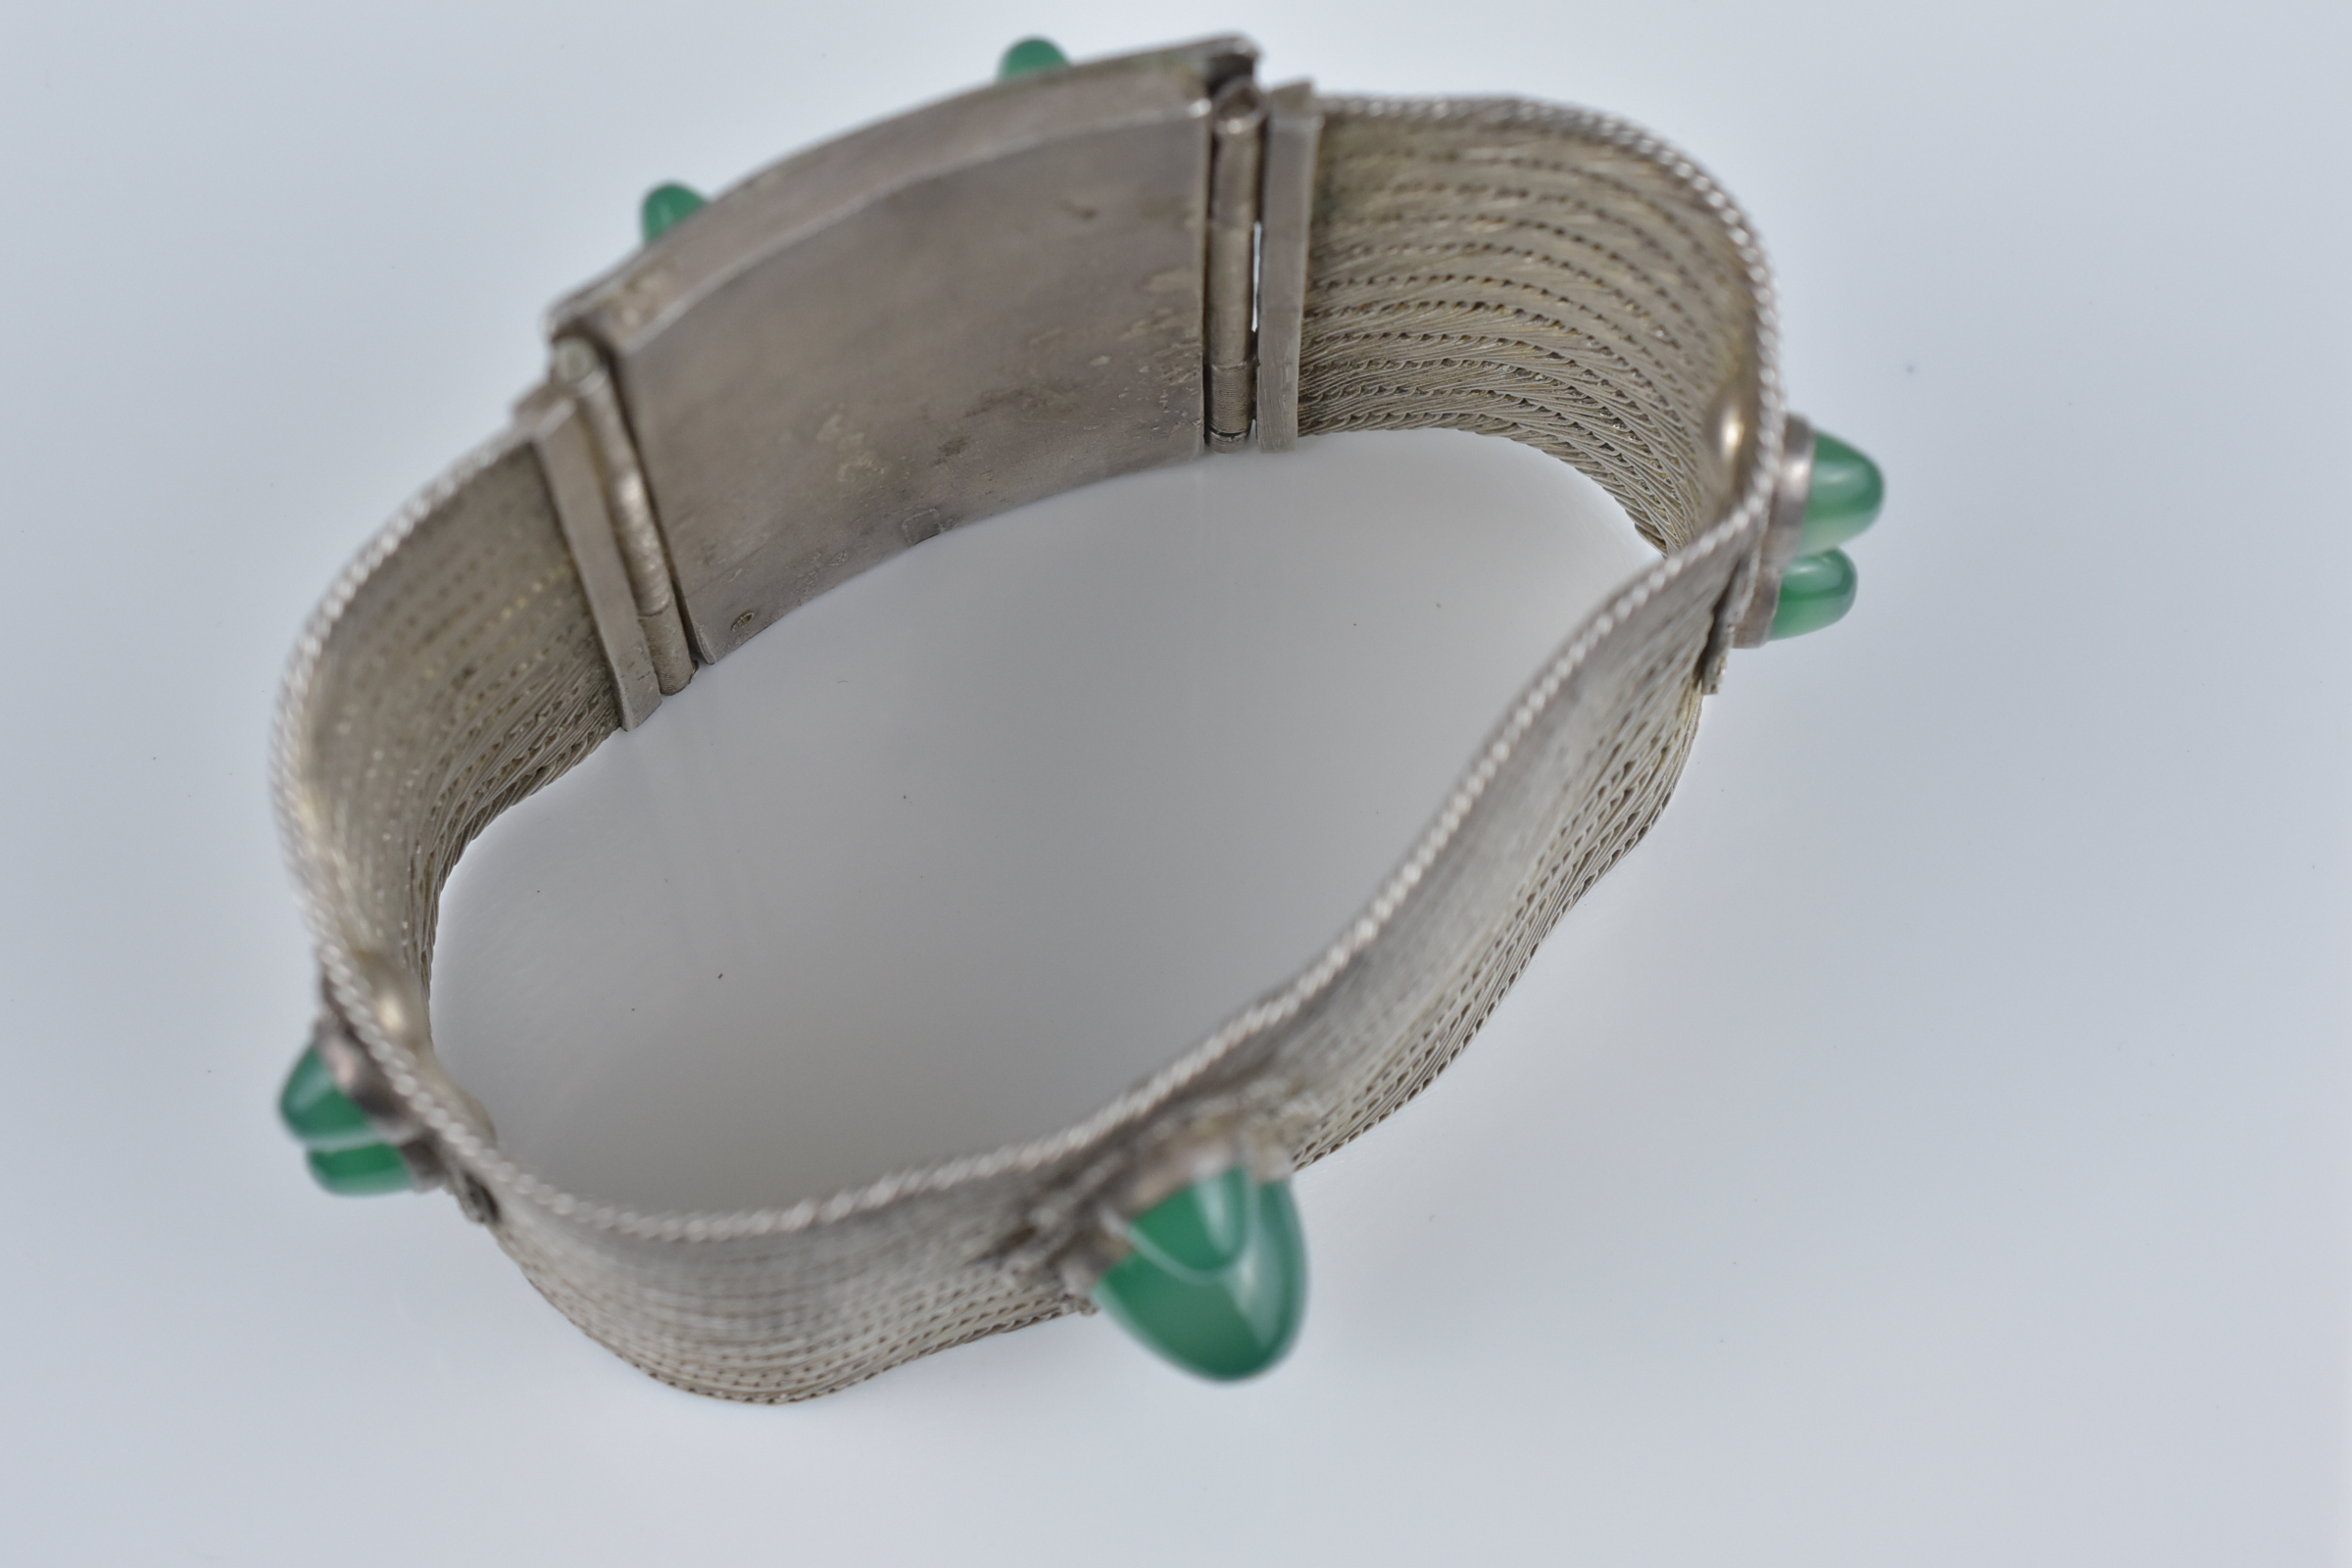 An antique silver metal and chrysoprase cuff bracelet - Image 3 of 5